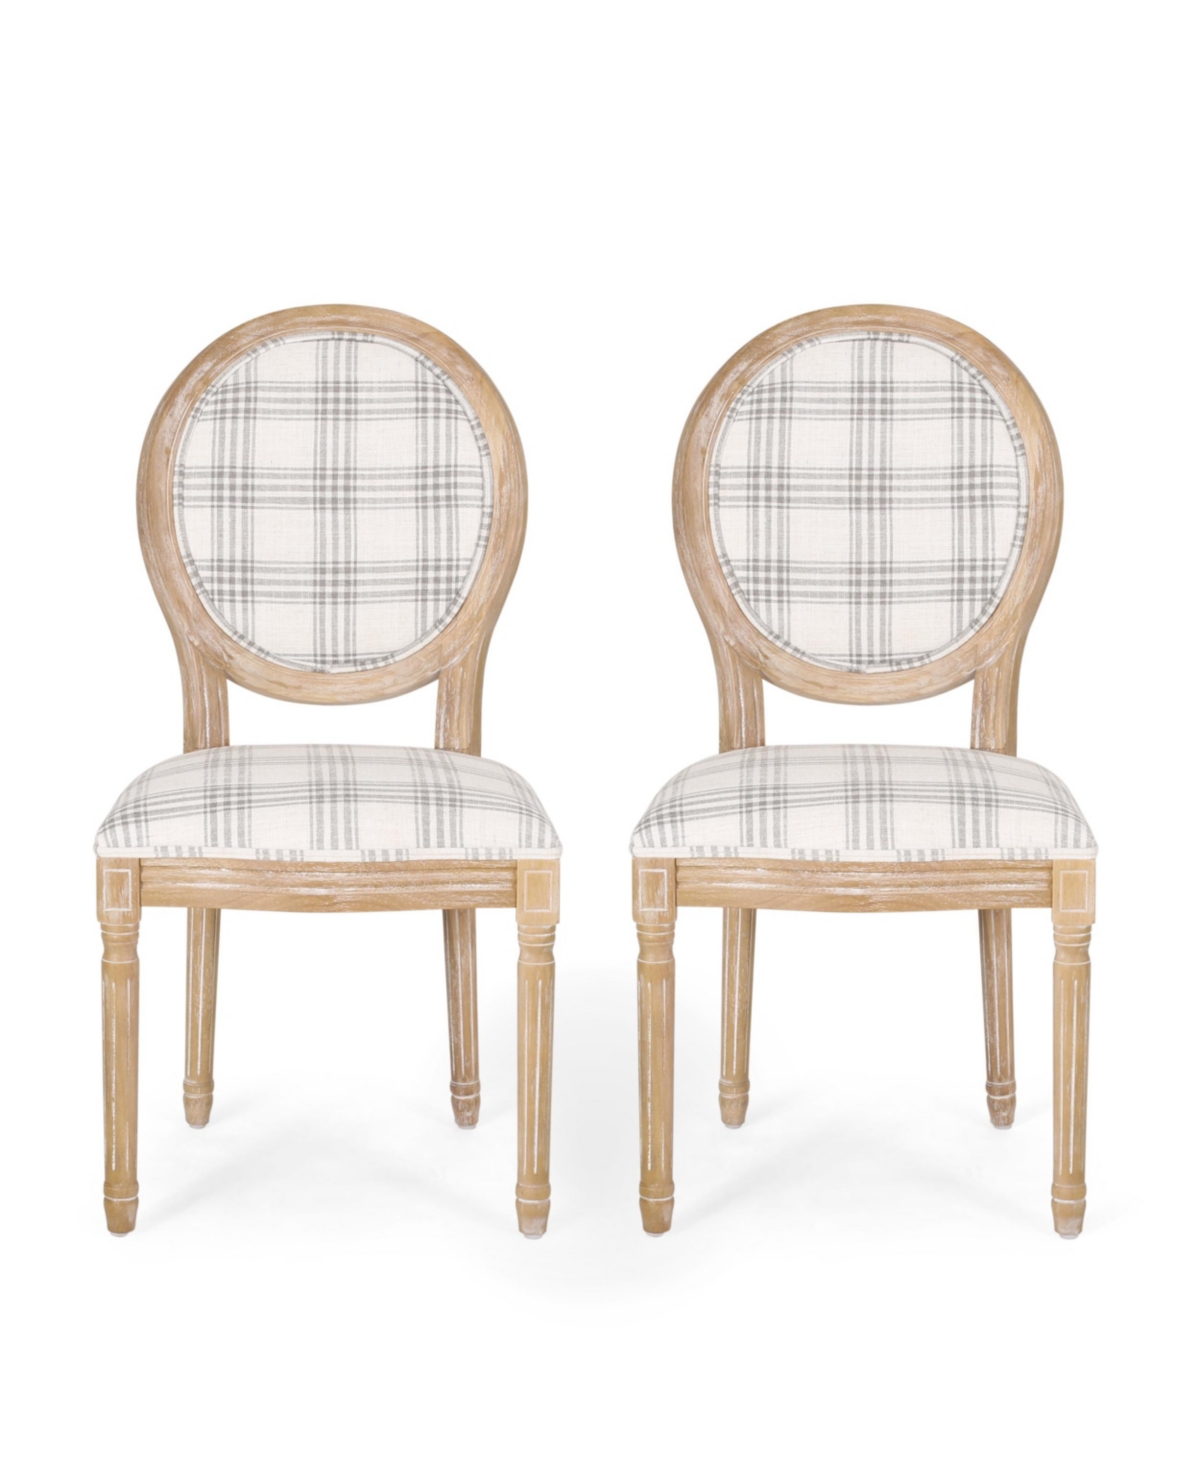 Noble House Phinnaeus French Country Dining Chairs Set, 2 Piece In Gray Plaid And Light Beige